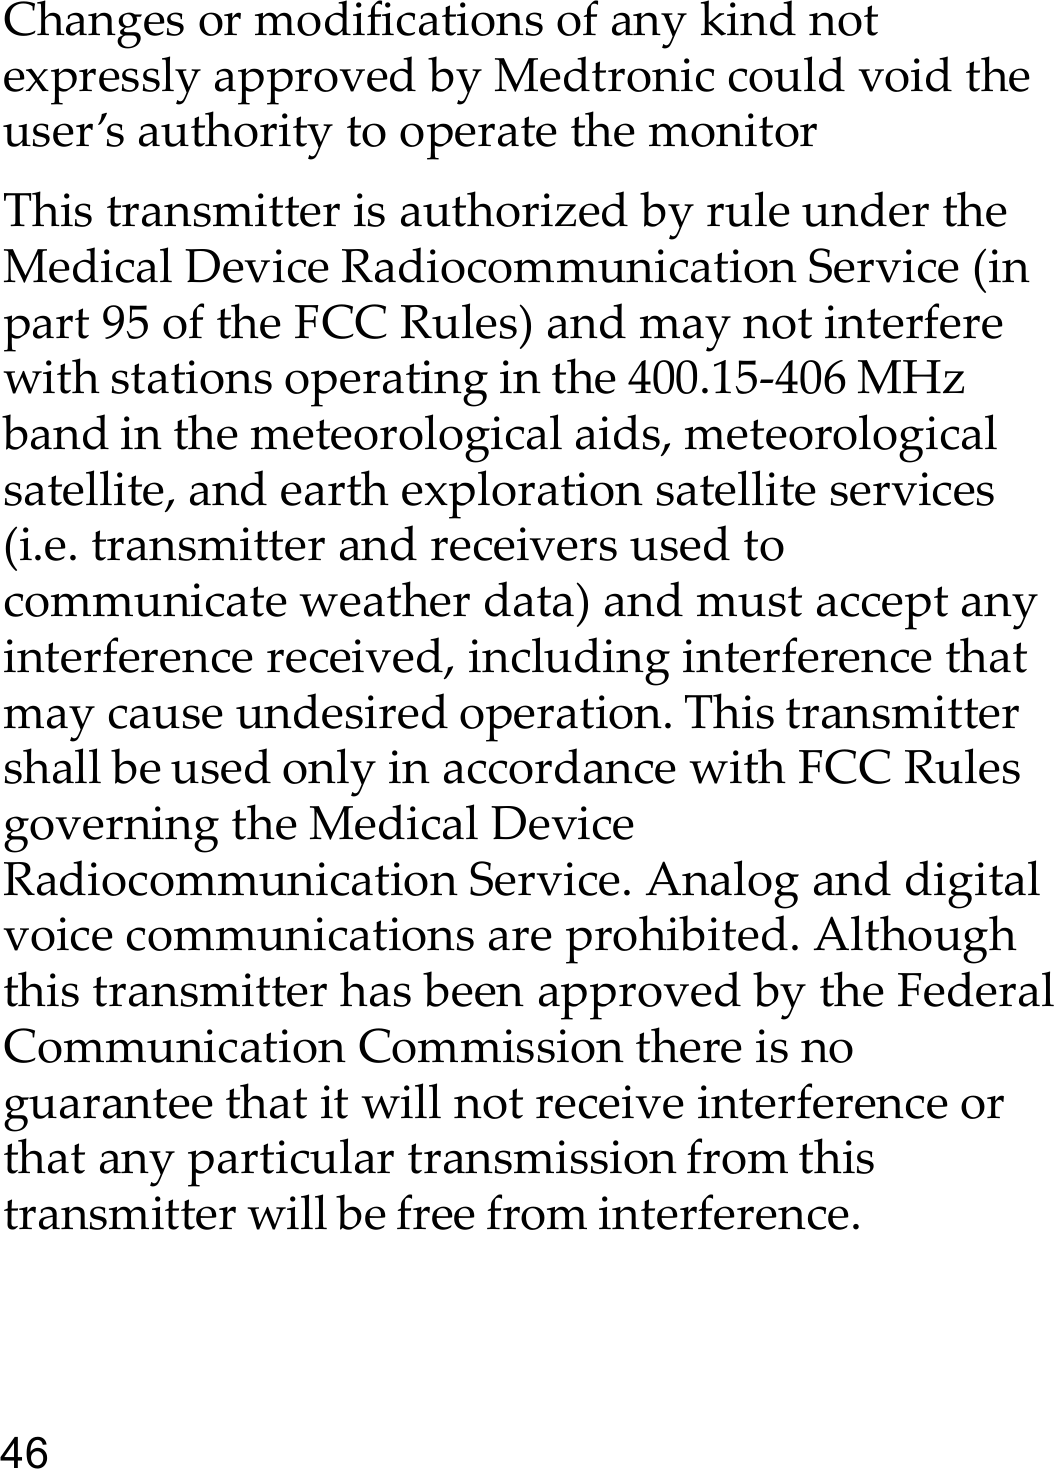 46Changes or modifications of any kind not expressly approved by Medtronic could void the user’s authority to operate the monitorThis transmitter is authorized by rule under the Medical Device Radiocommunication Service (in part 95 of the FCC Rules) and may not interfere with stations operating in the 400.15-406 MHz band in the meteorological aids, meteorological satellite, and earth exploration satellite services (i.e. transmitter and receivers used to communicate weather data) and must accept any interference received, including interference that may cause undesired operation. This transmitter shall be used only in accordance with FCC Rules governing the Medical Device Radiocommunication Service. Analog and digital voice communications are prohibited. Although this transmitter has been approved by the Federal Communication Commission there is no guarantee that it will not receive interference or that any particular transmission from this transmitter will be free from interference.